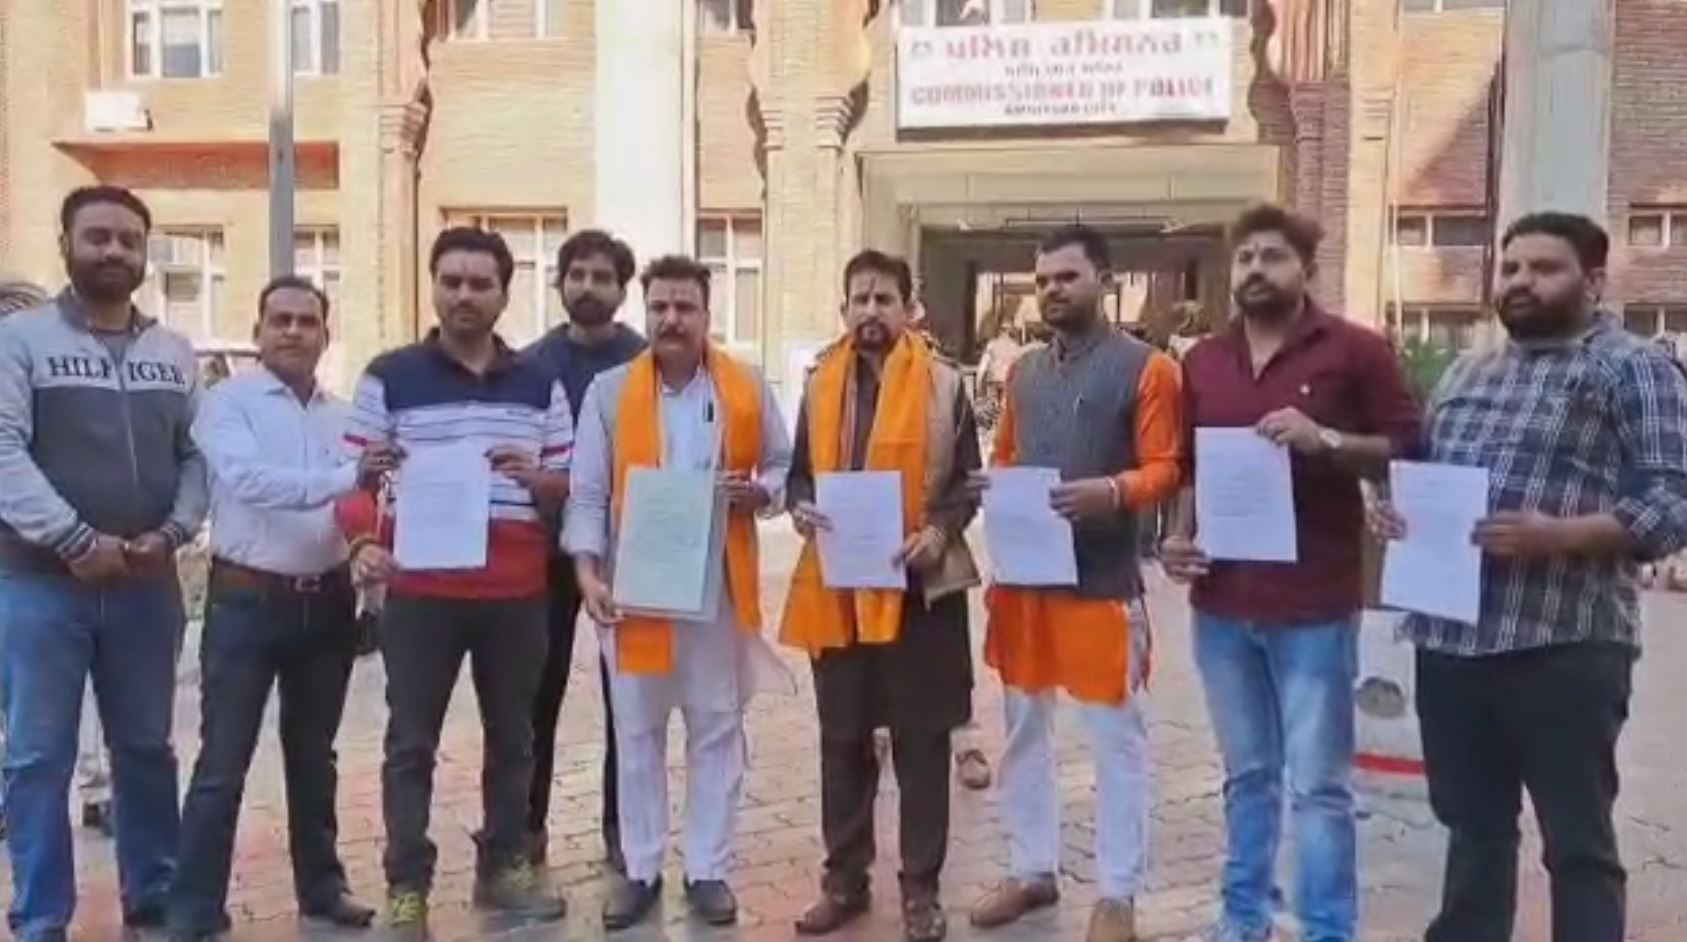 Hindu organizations gave a demand letter to the Police Commissioner regarding the arrival of Bhai Amritpal Singh at Darbar Sahib